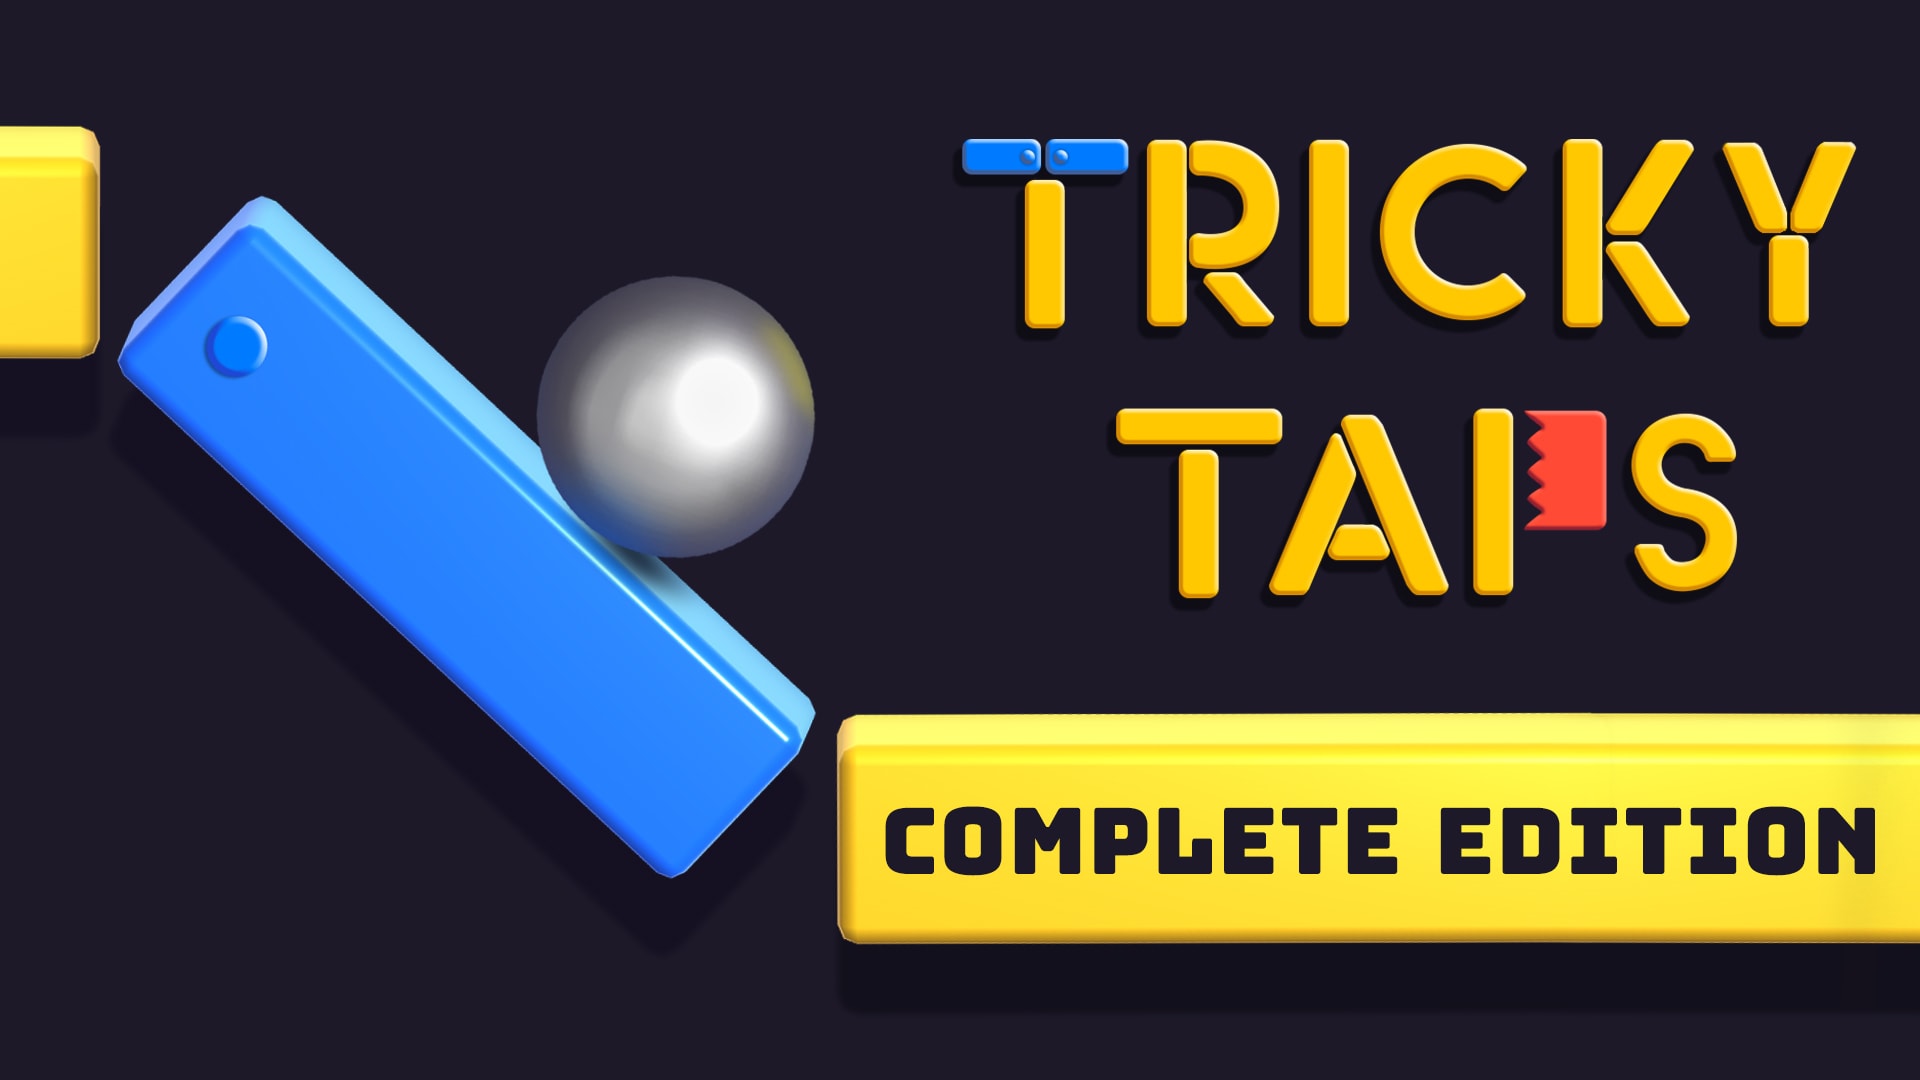 Tricky Taps: Complete Edition